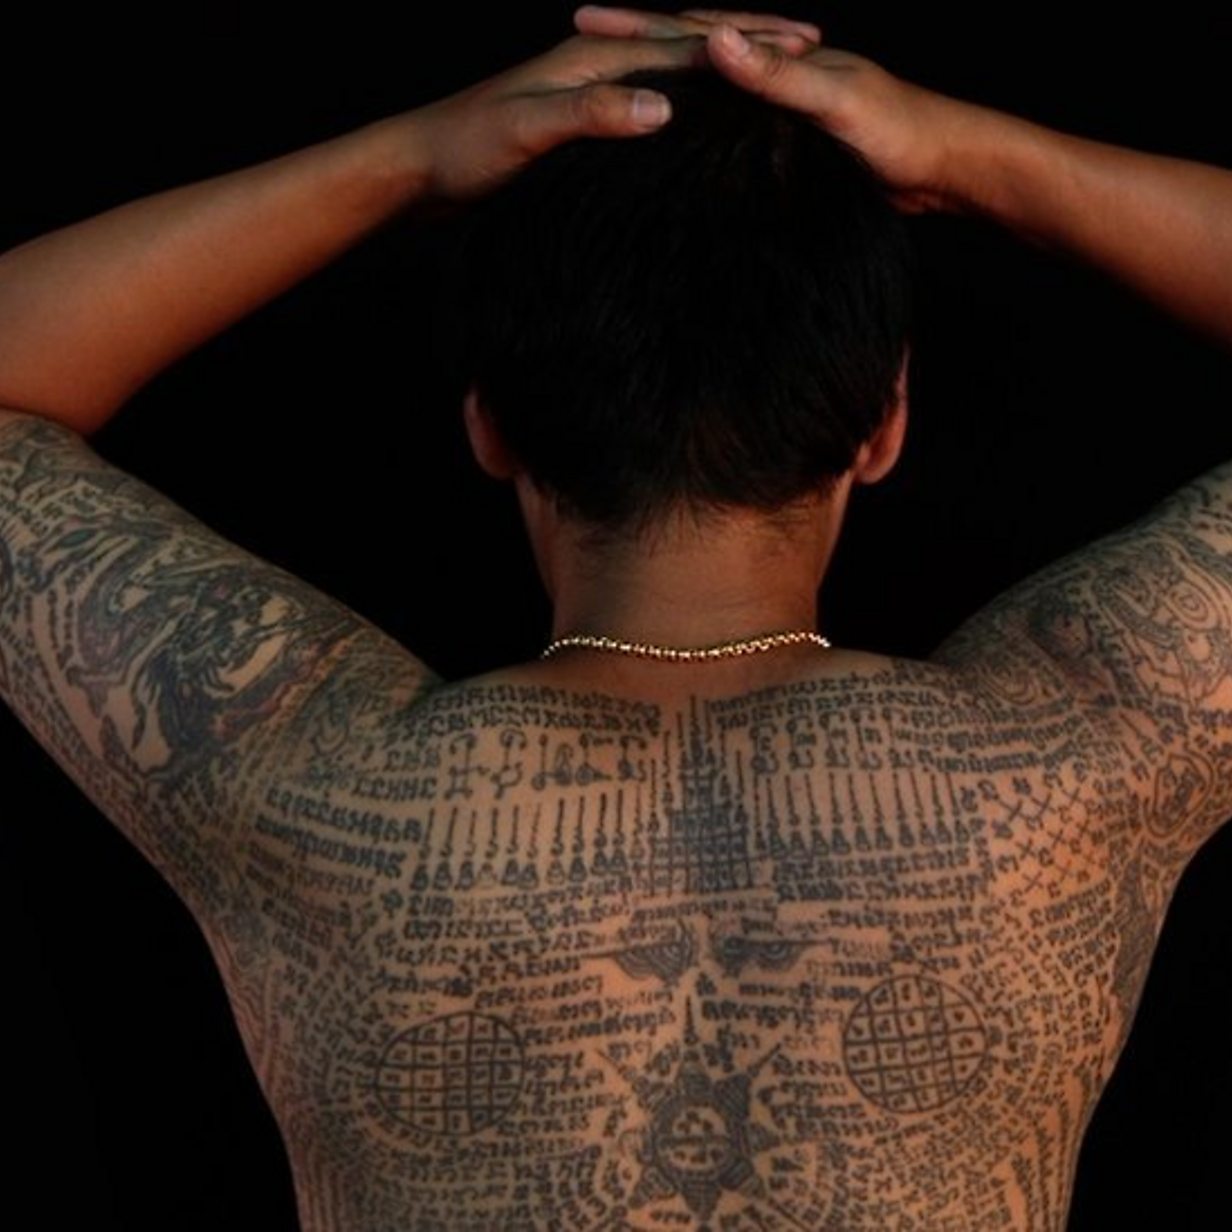 The sacred tattoos inked by Thai monks